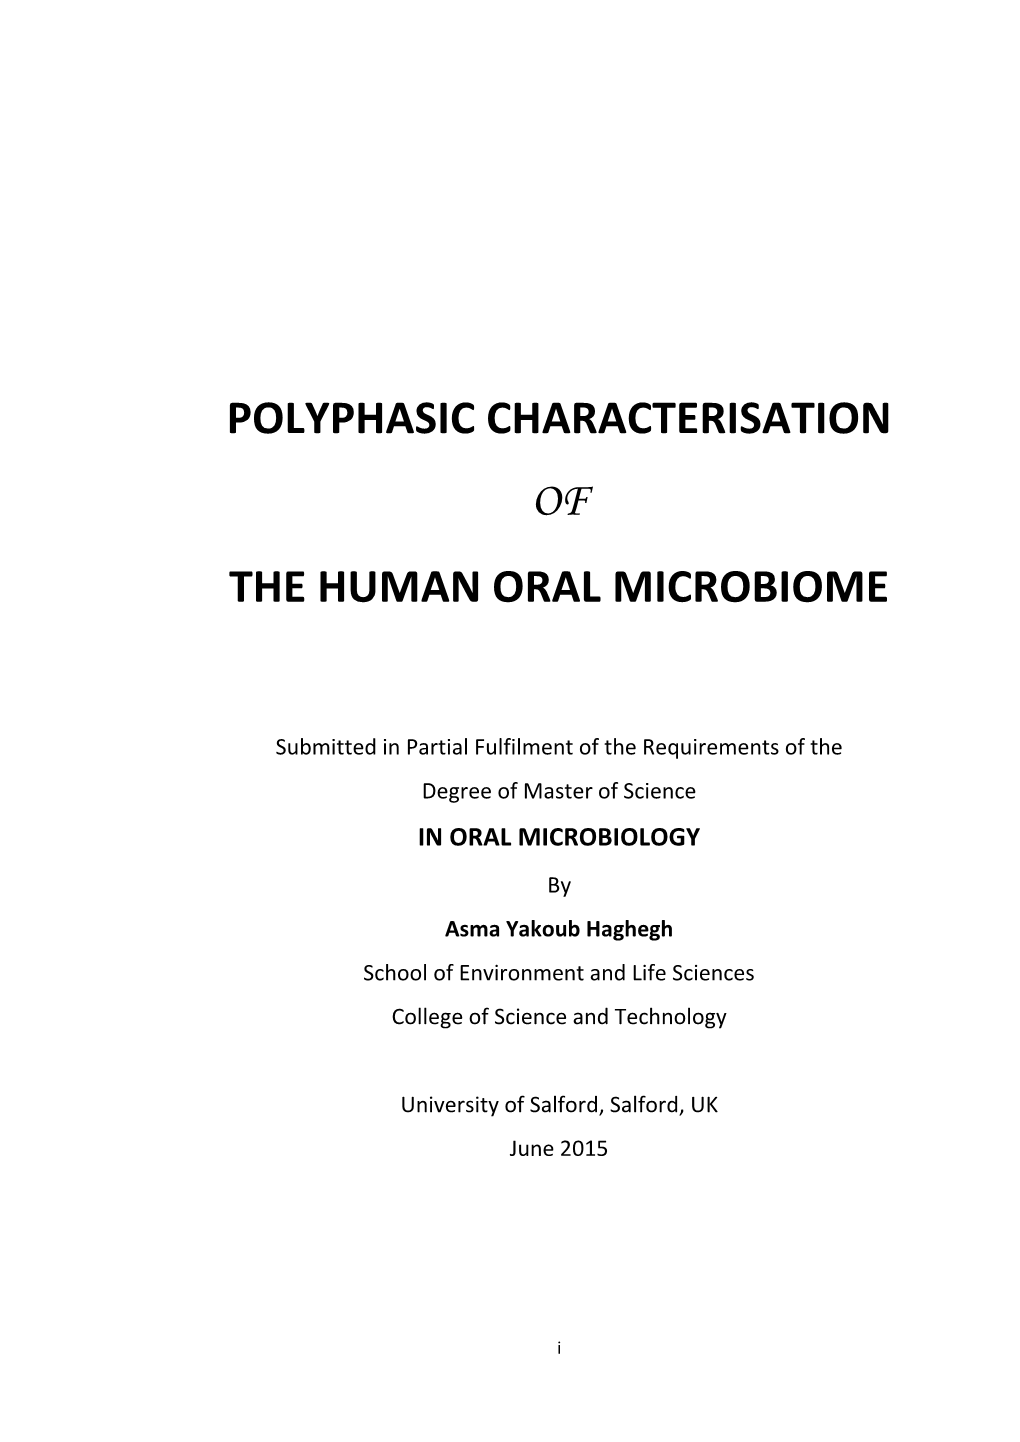 Polyphasic Characterisation of the Human Oral Microbiome